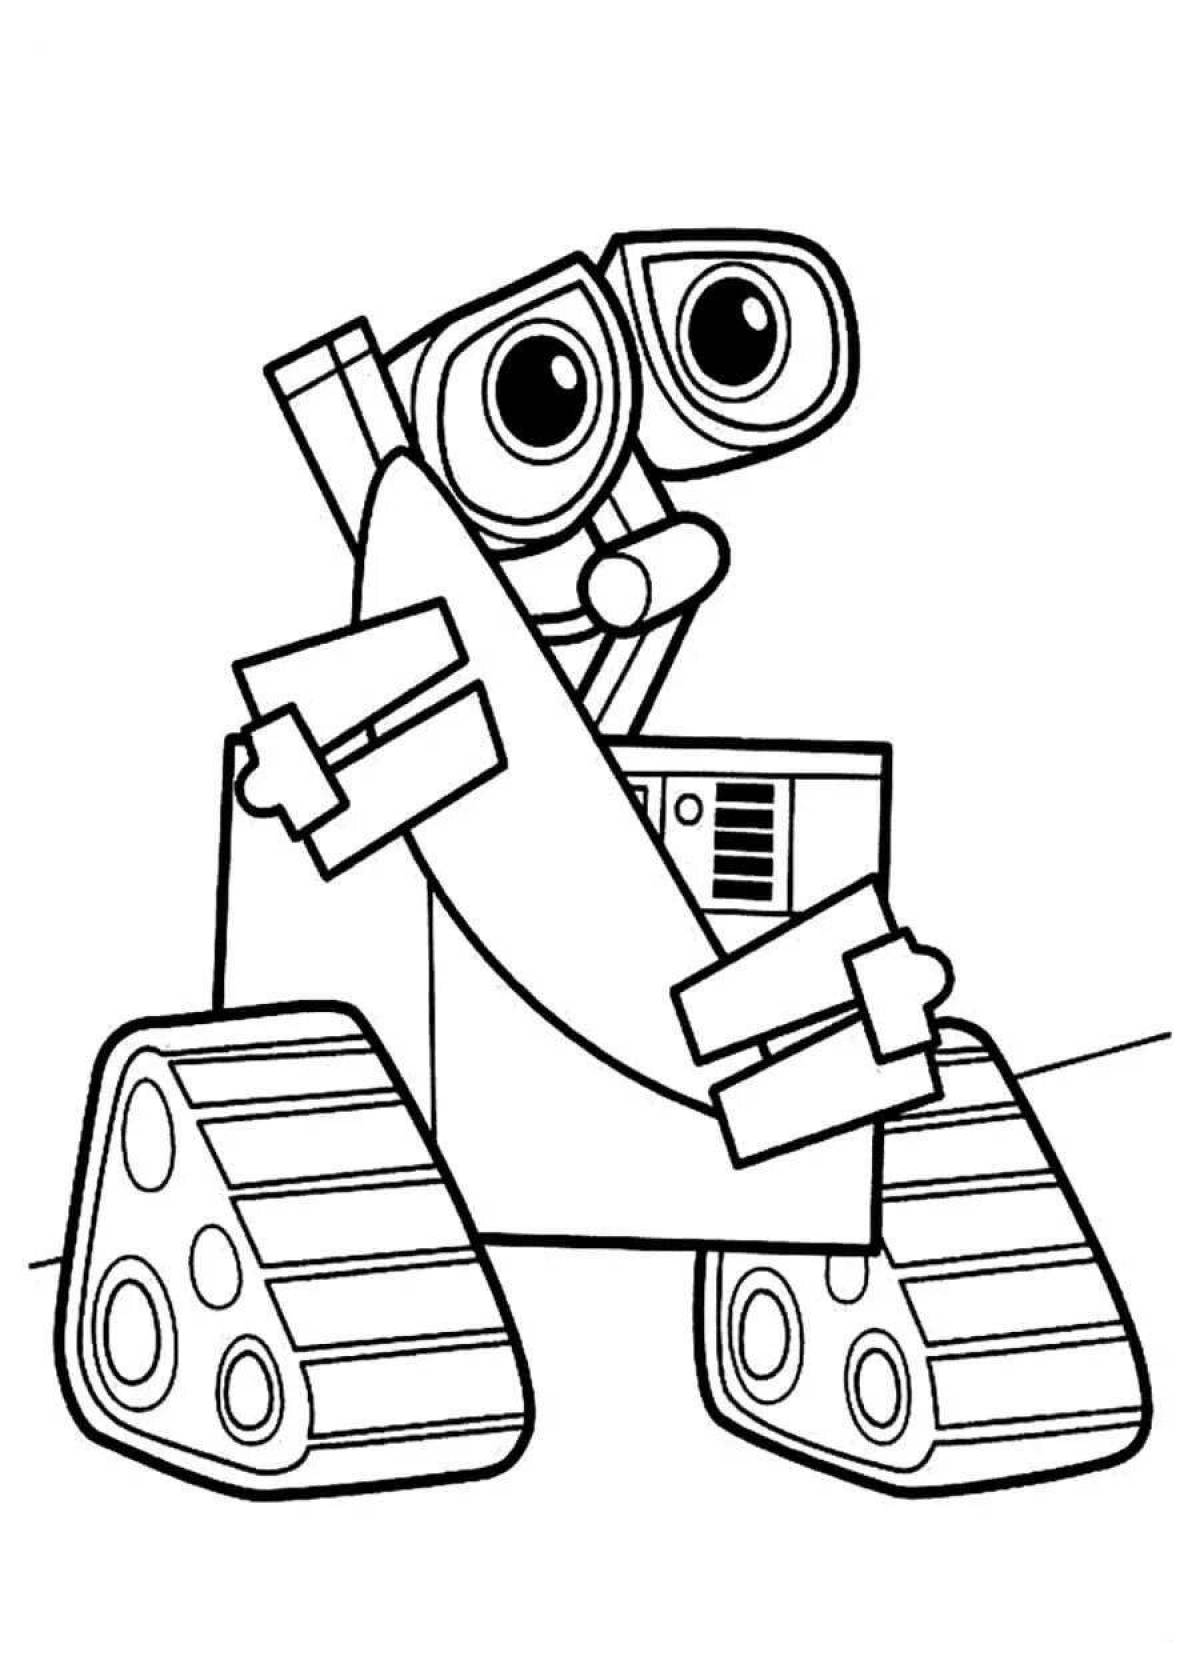 Amazing robot valley coloring page